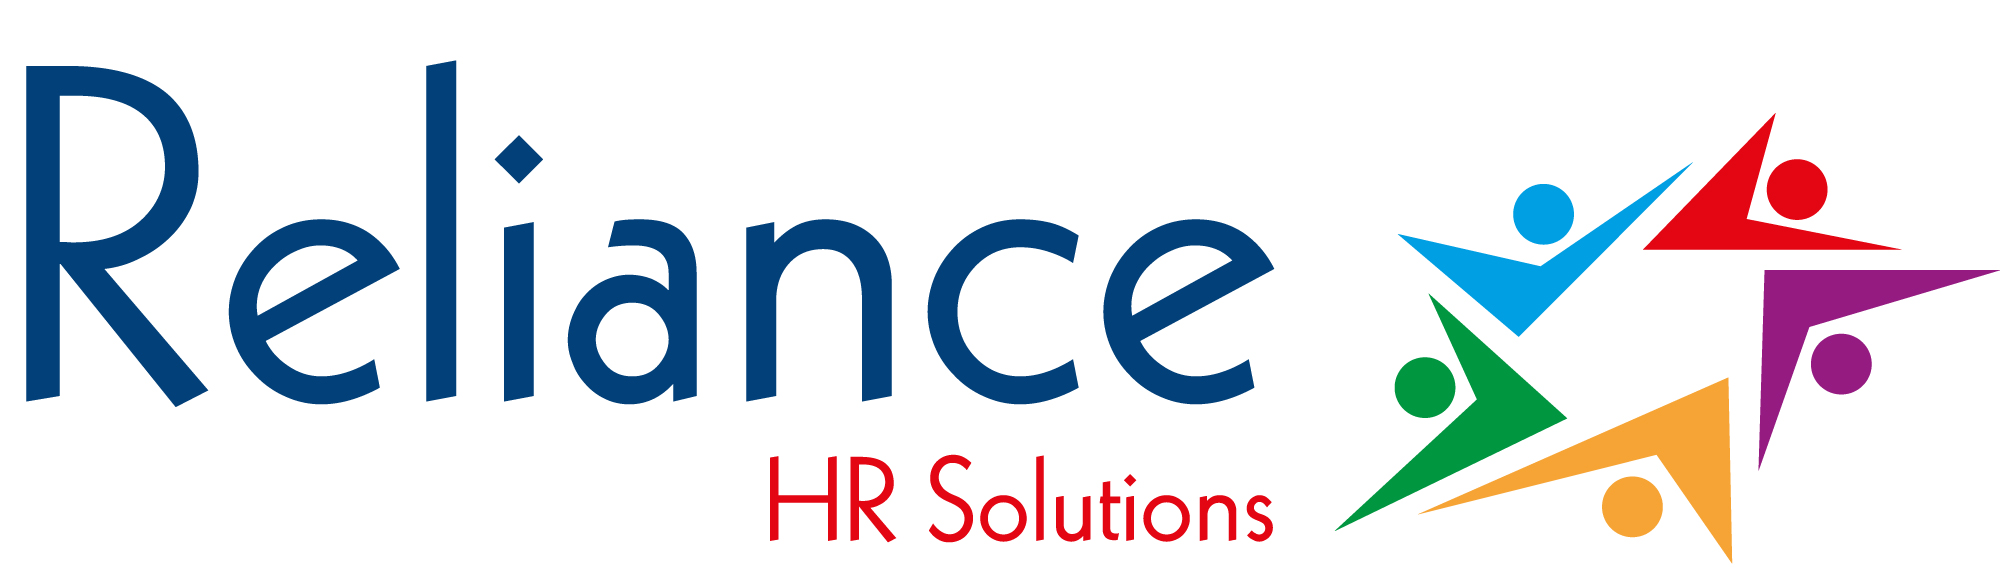 Reliance HR Solutions